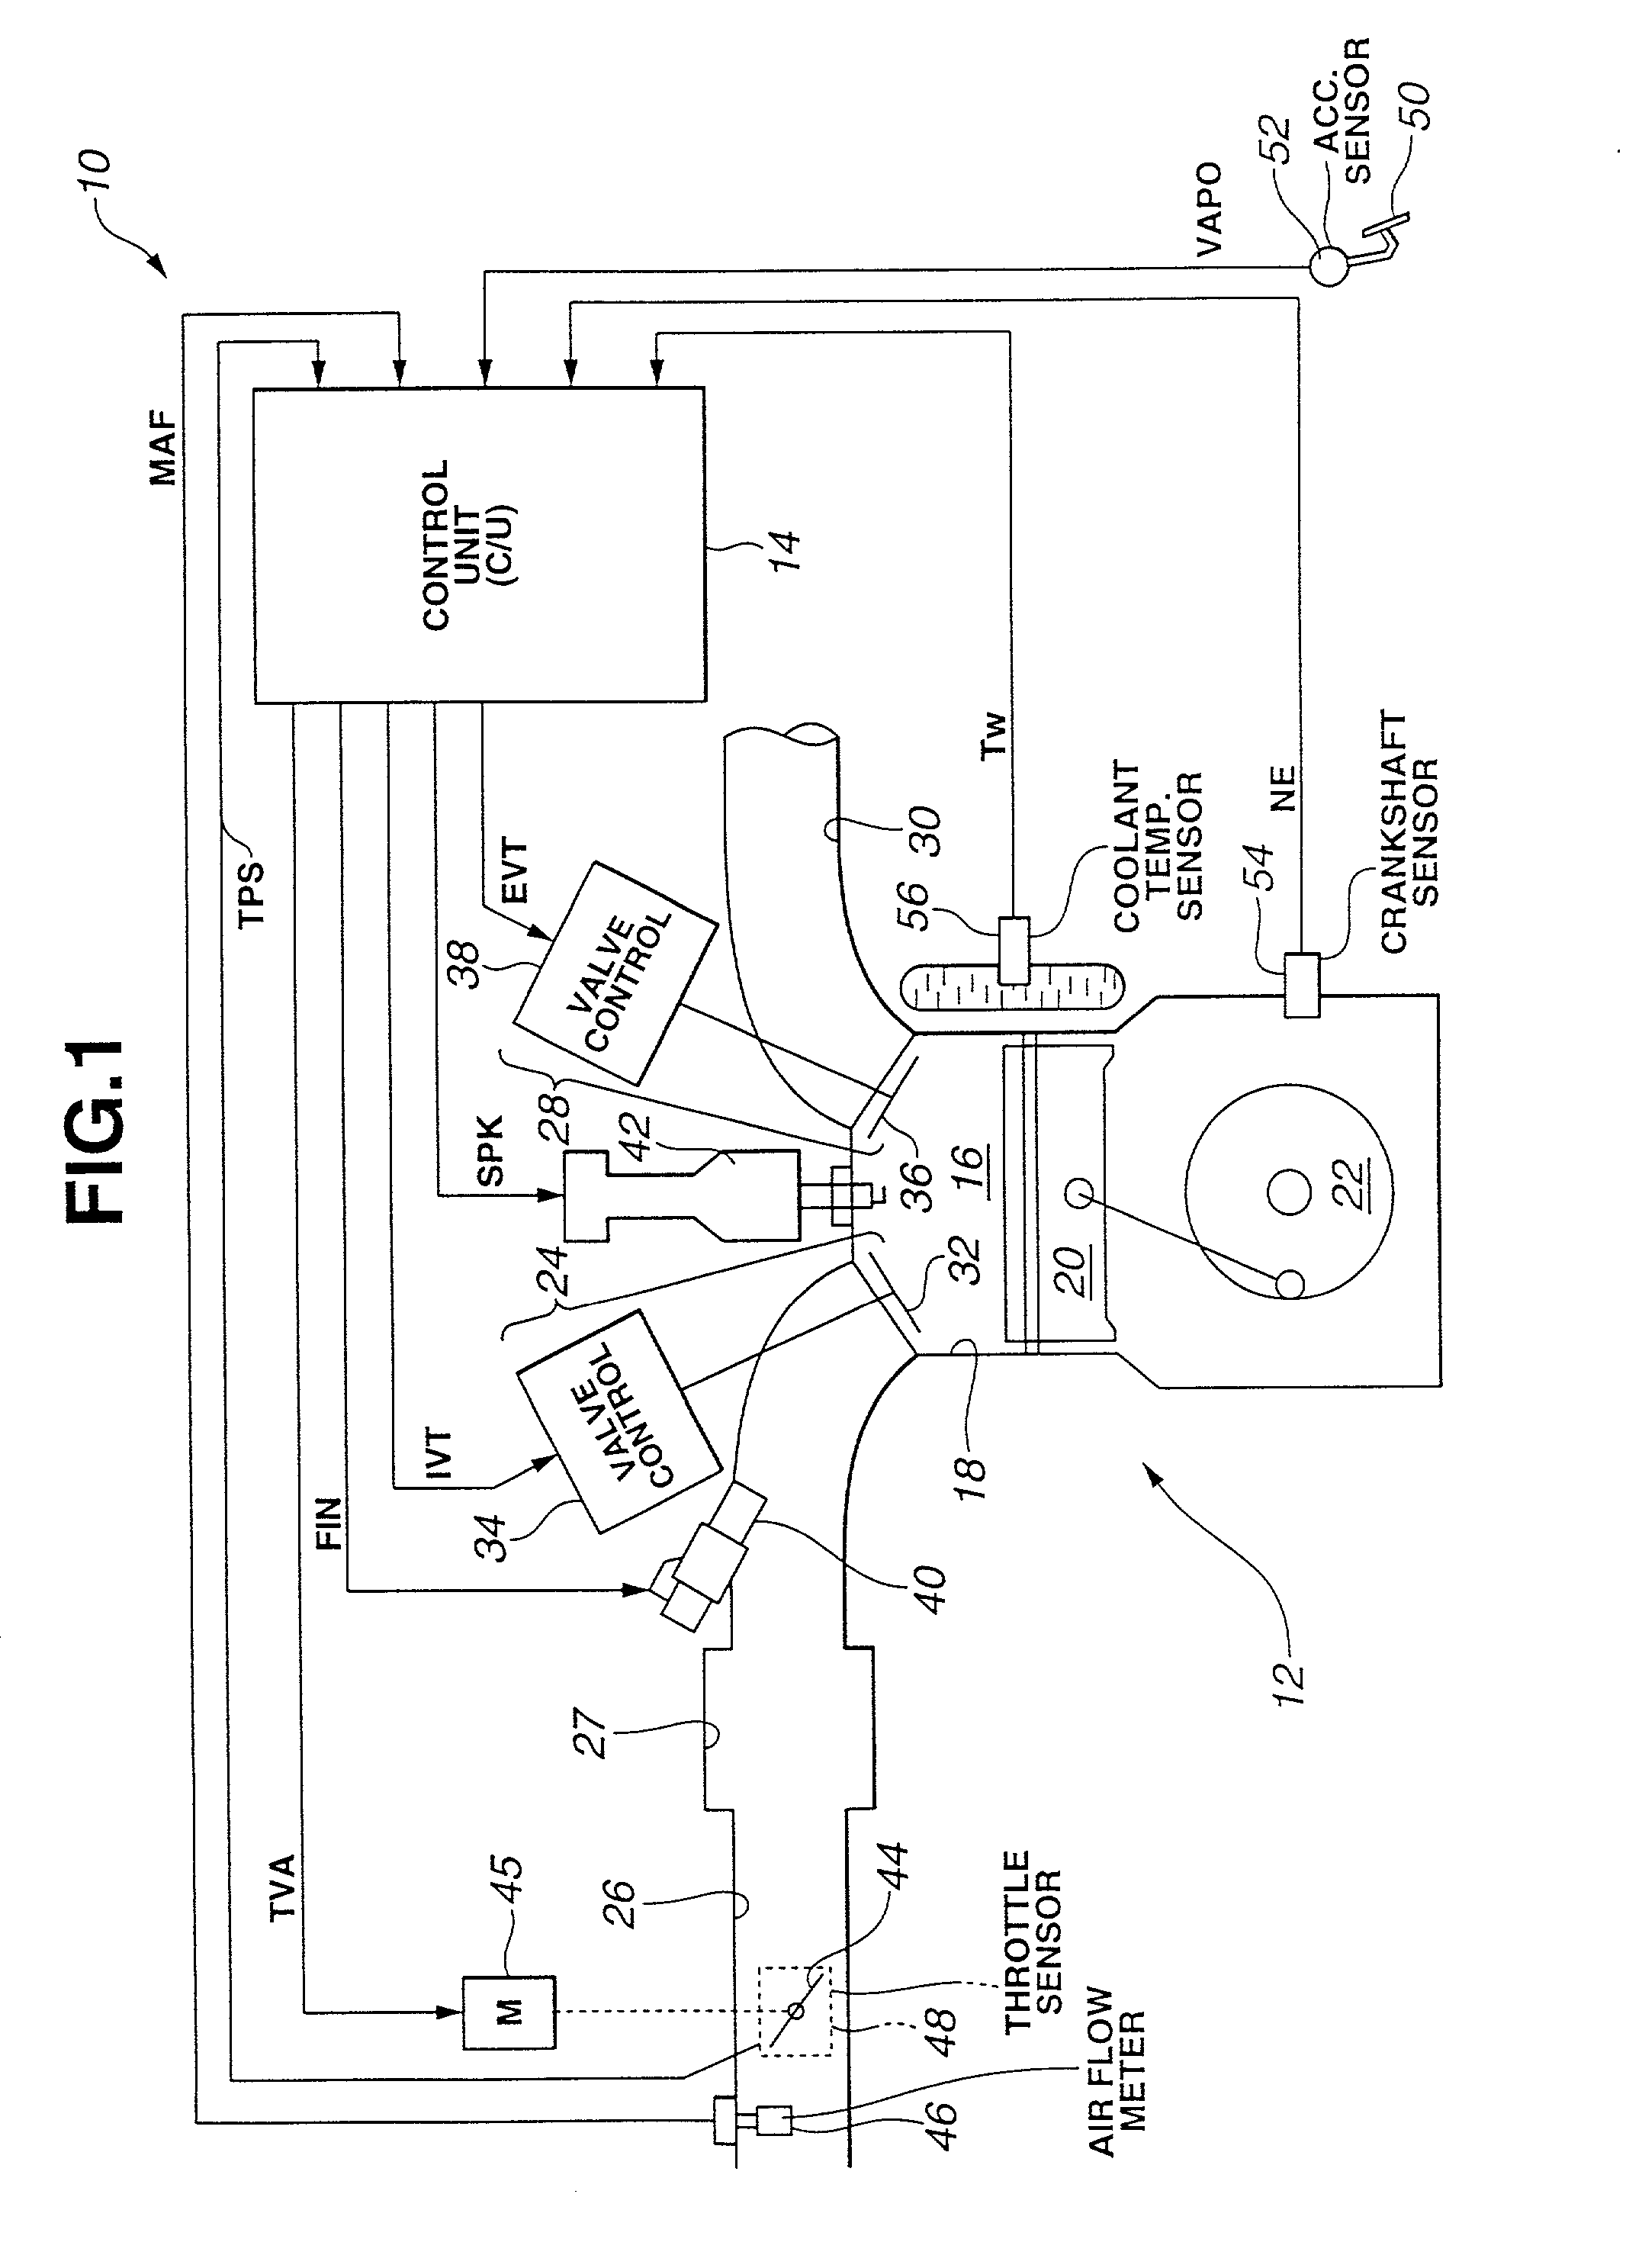 System and method for controlling intake air by variable valve timing